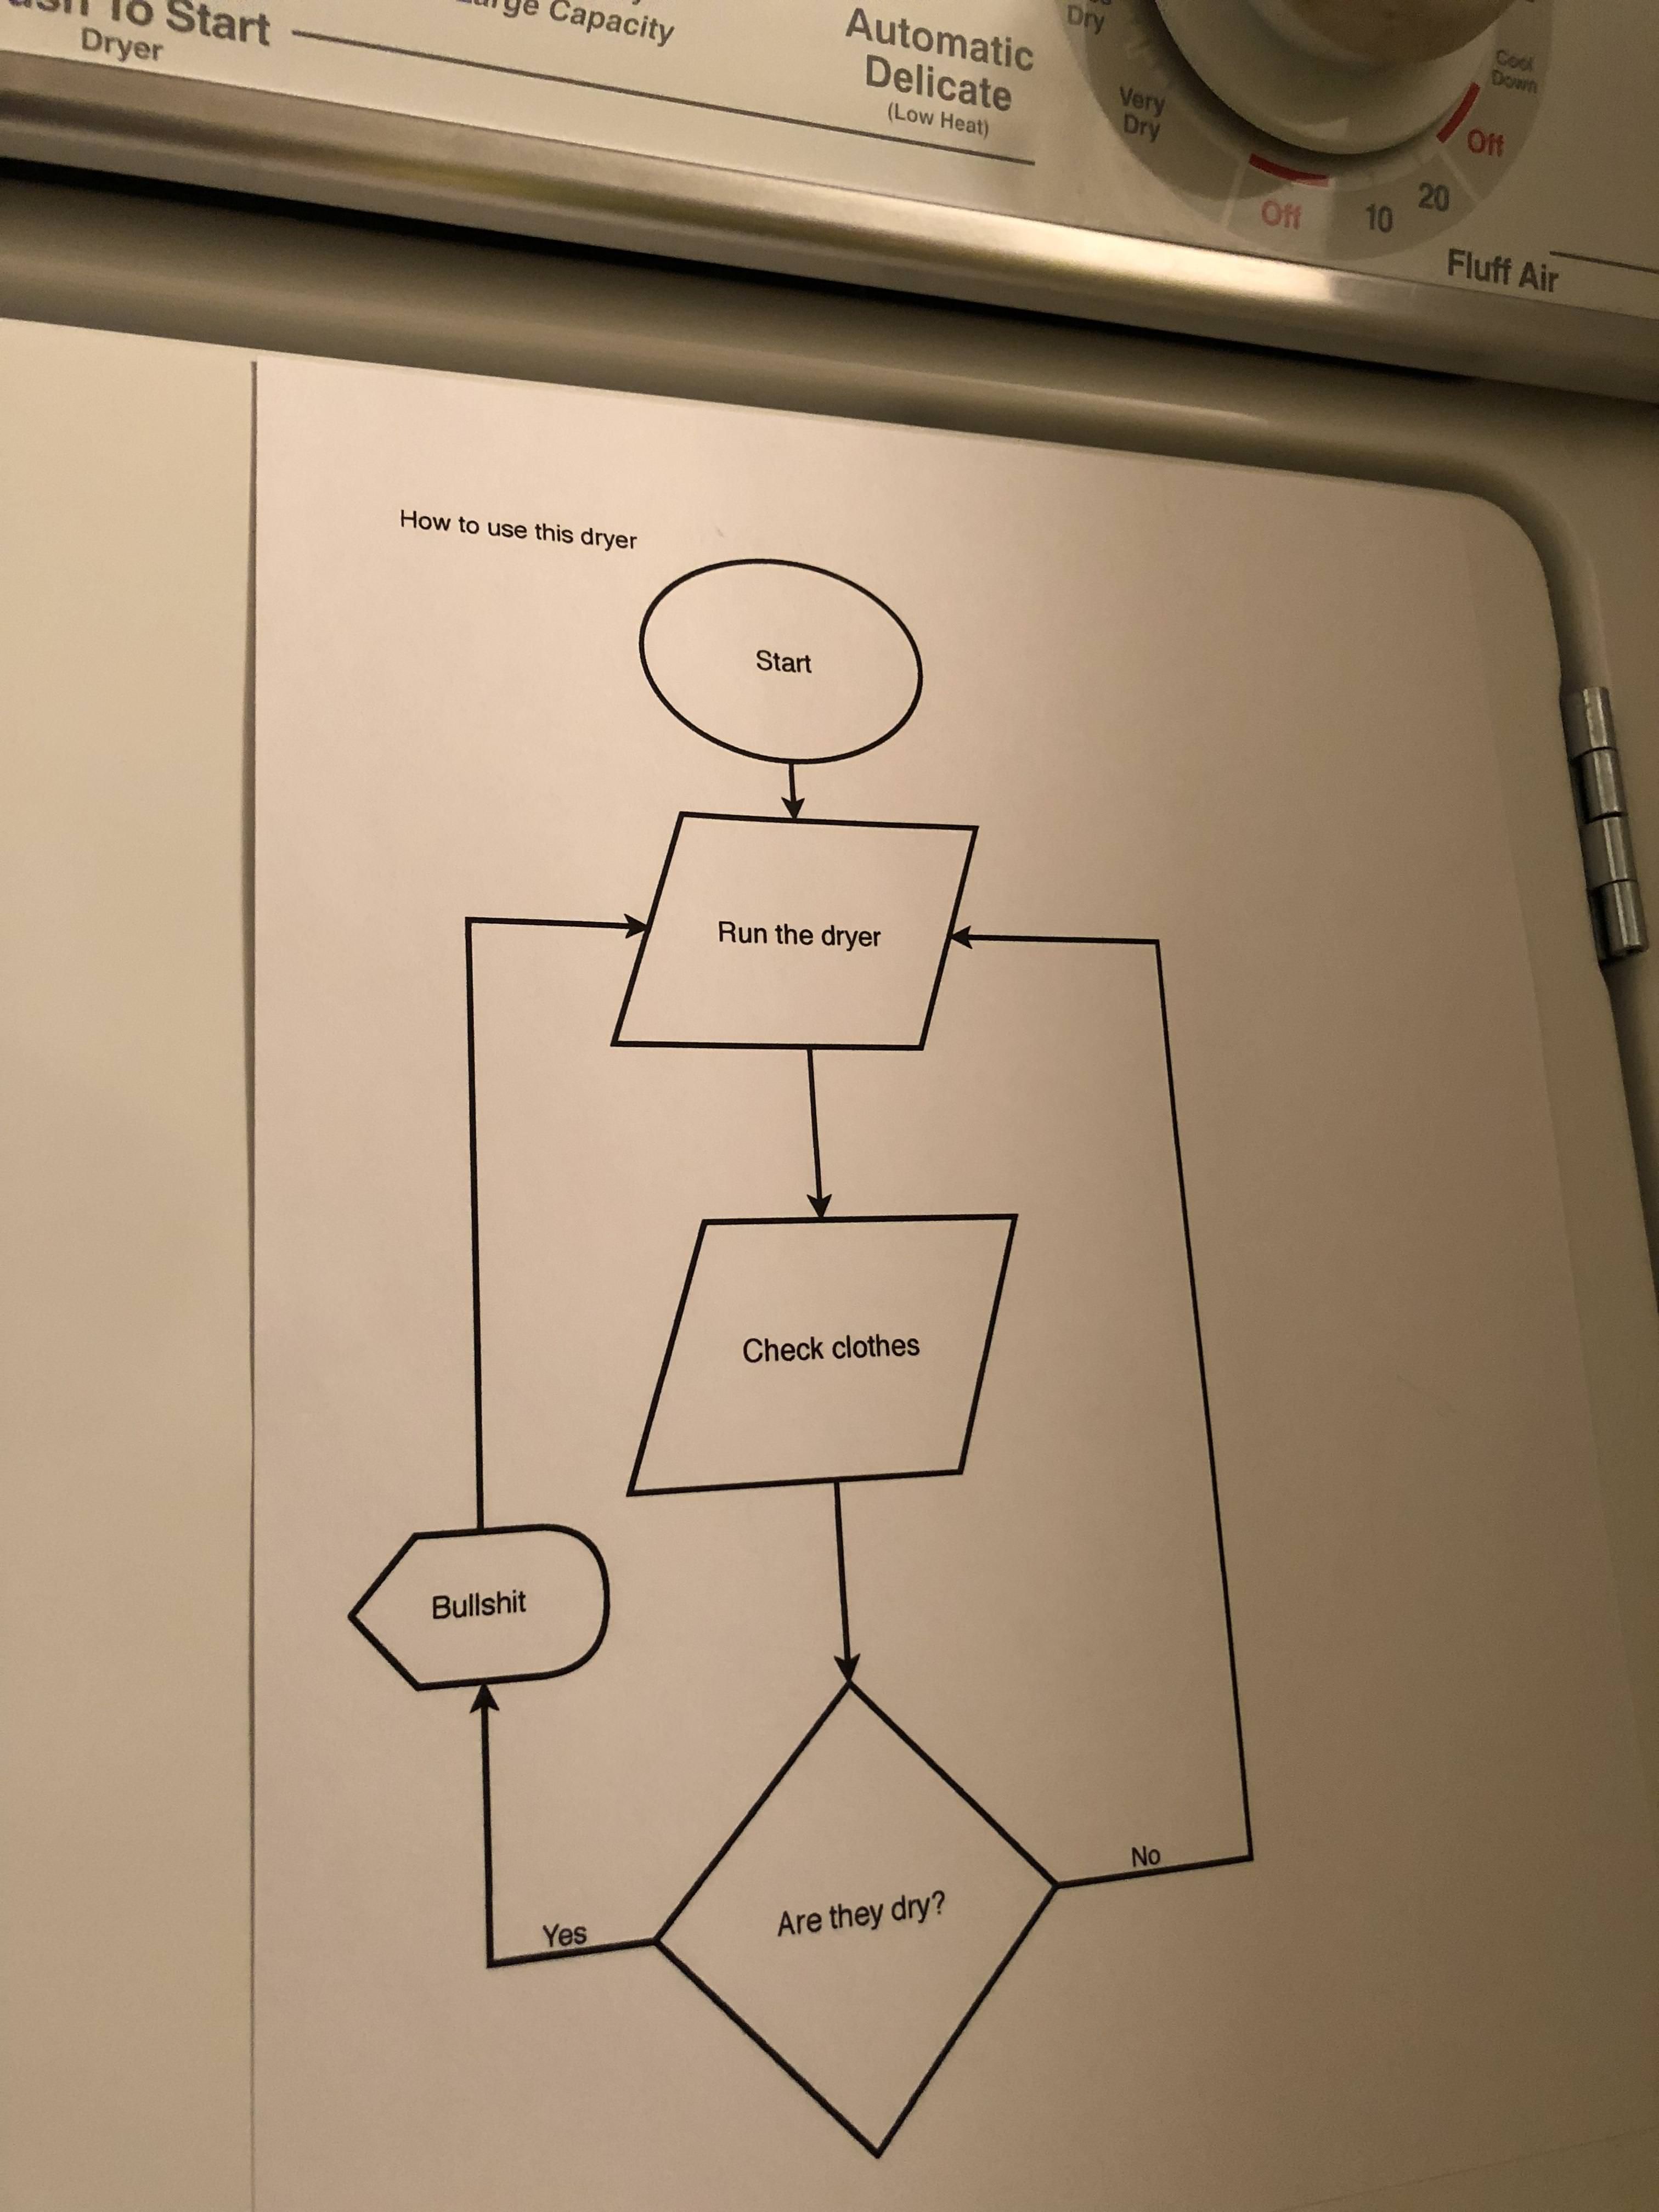 My roommate made a flowchart explaining how to use our terrible dryer.